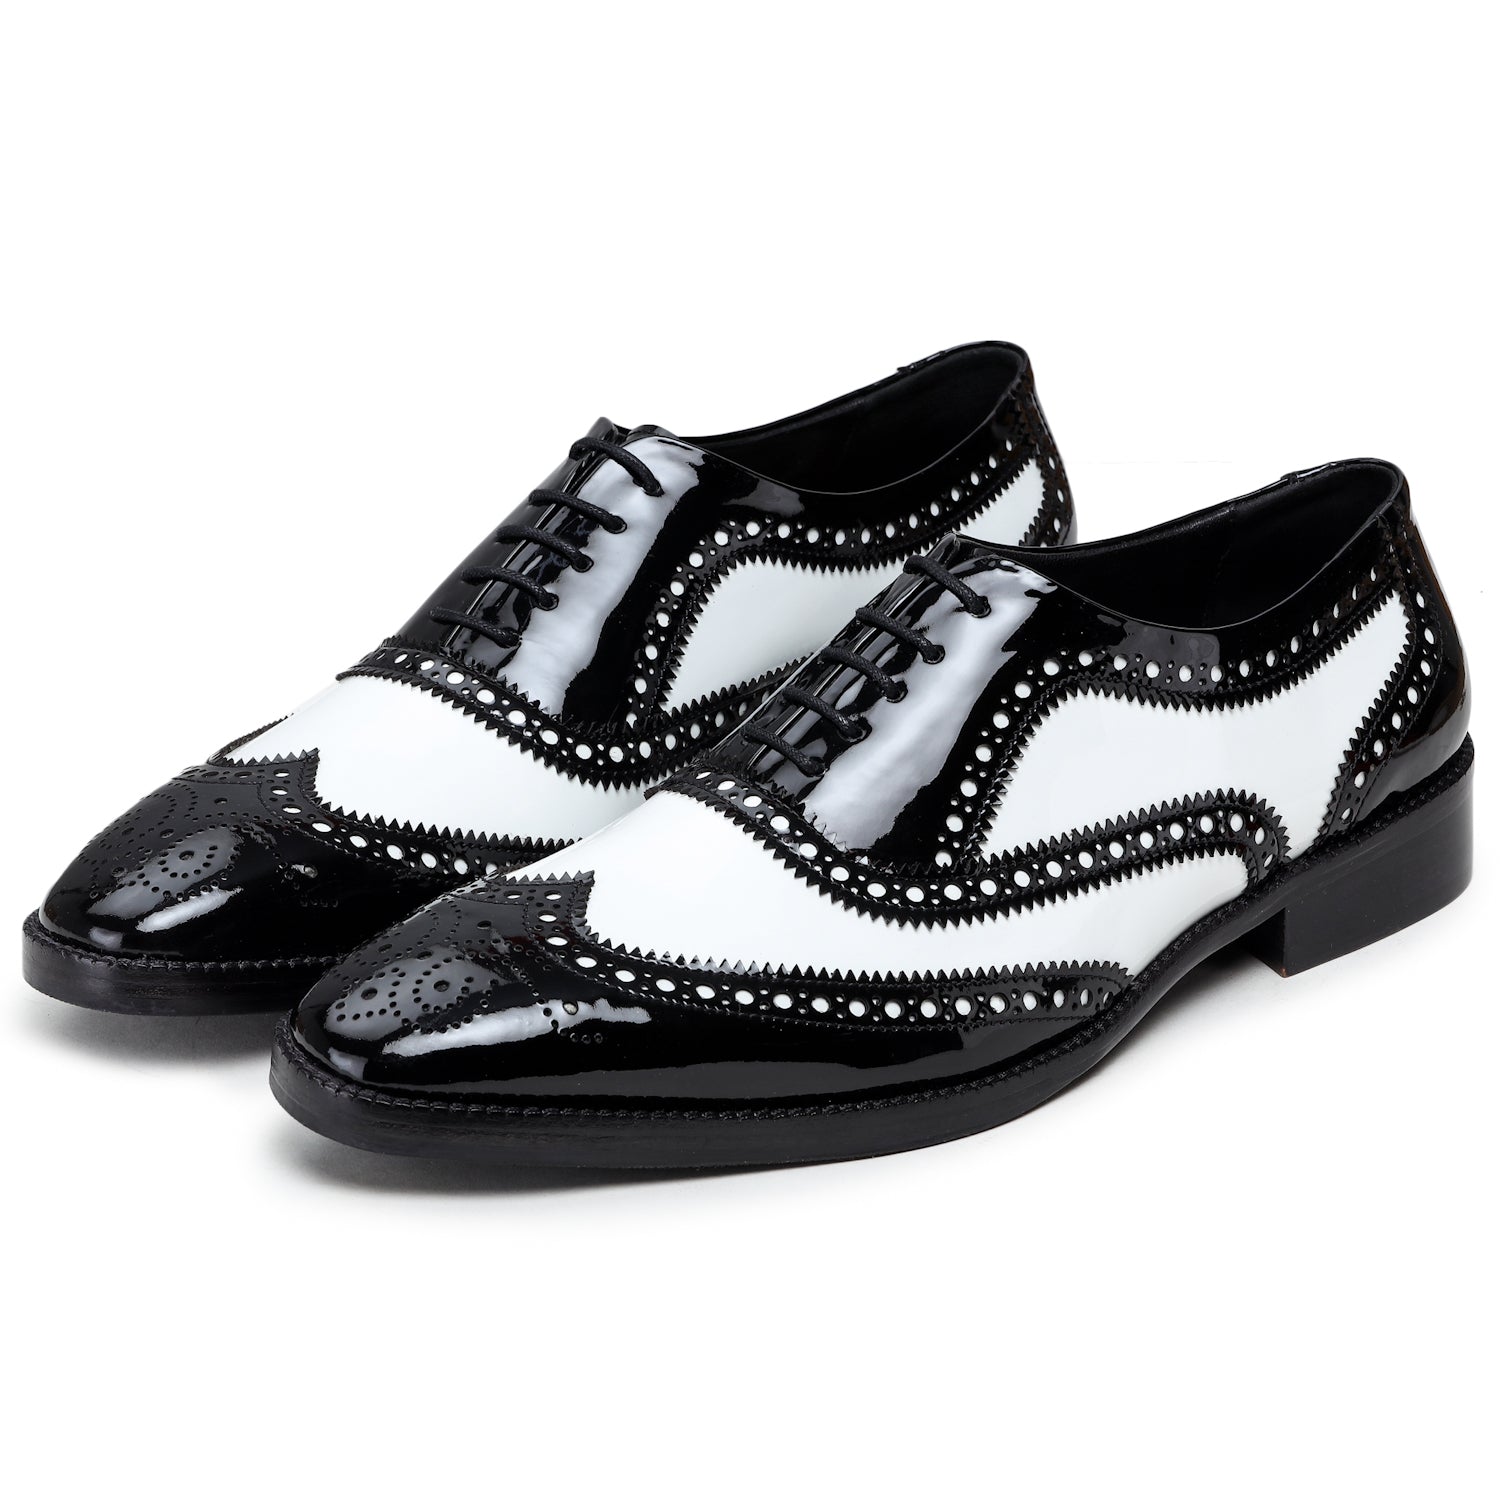 black and white dress shoes for men